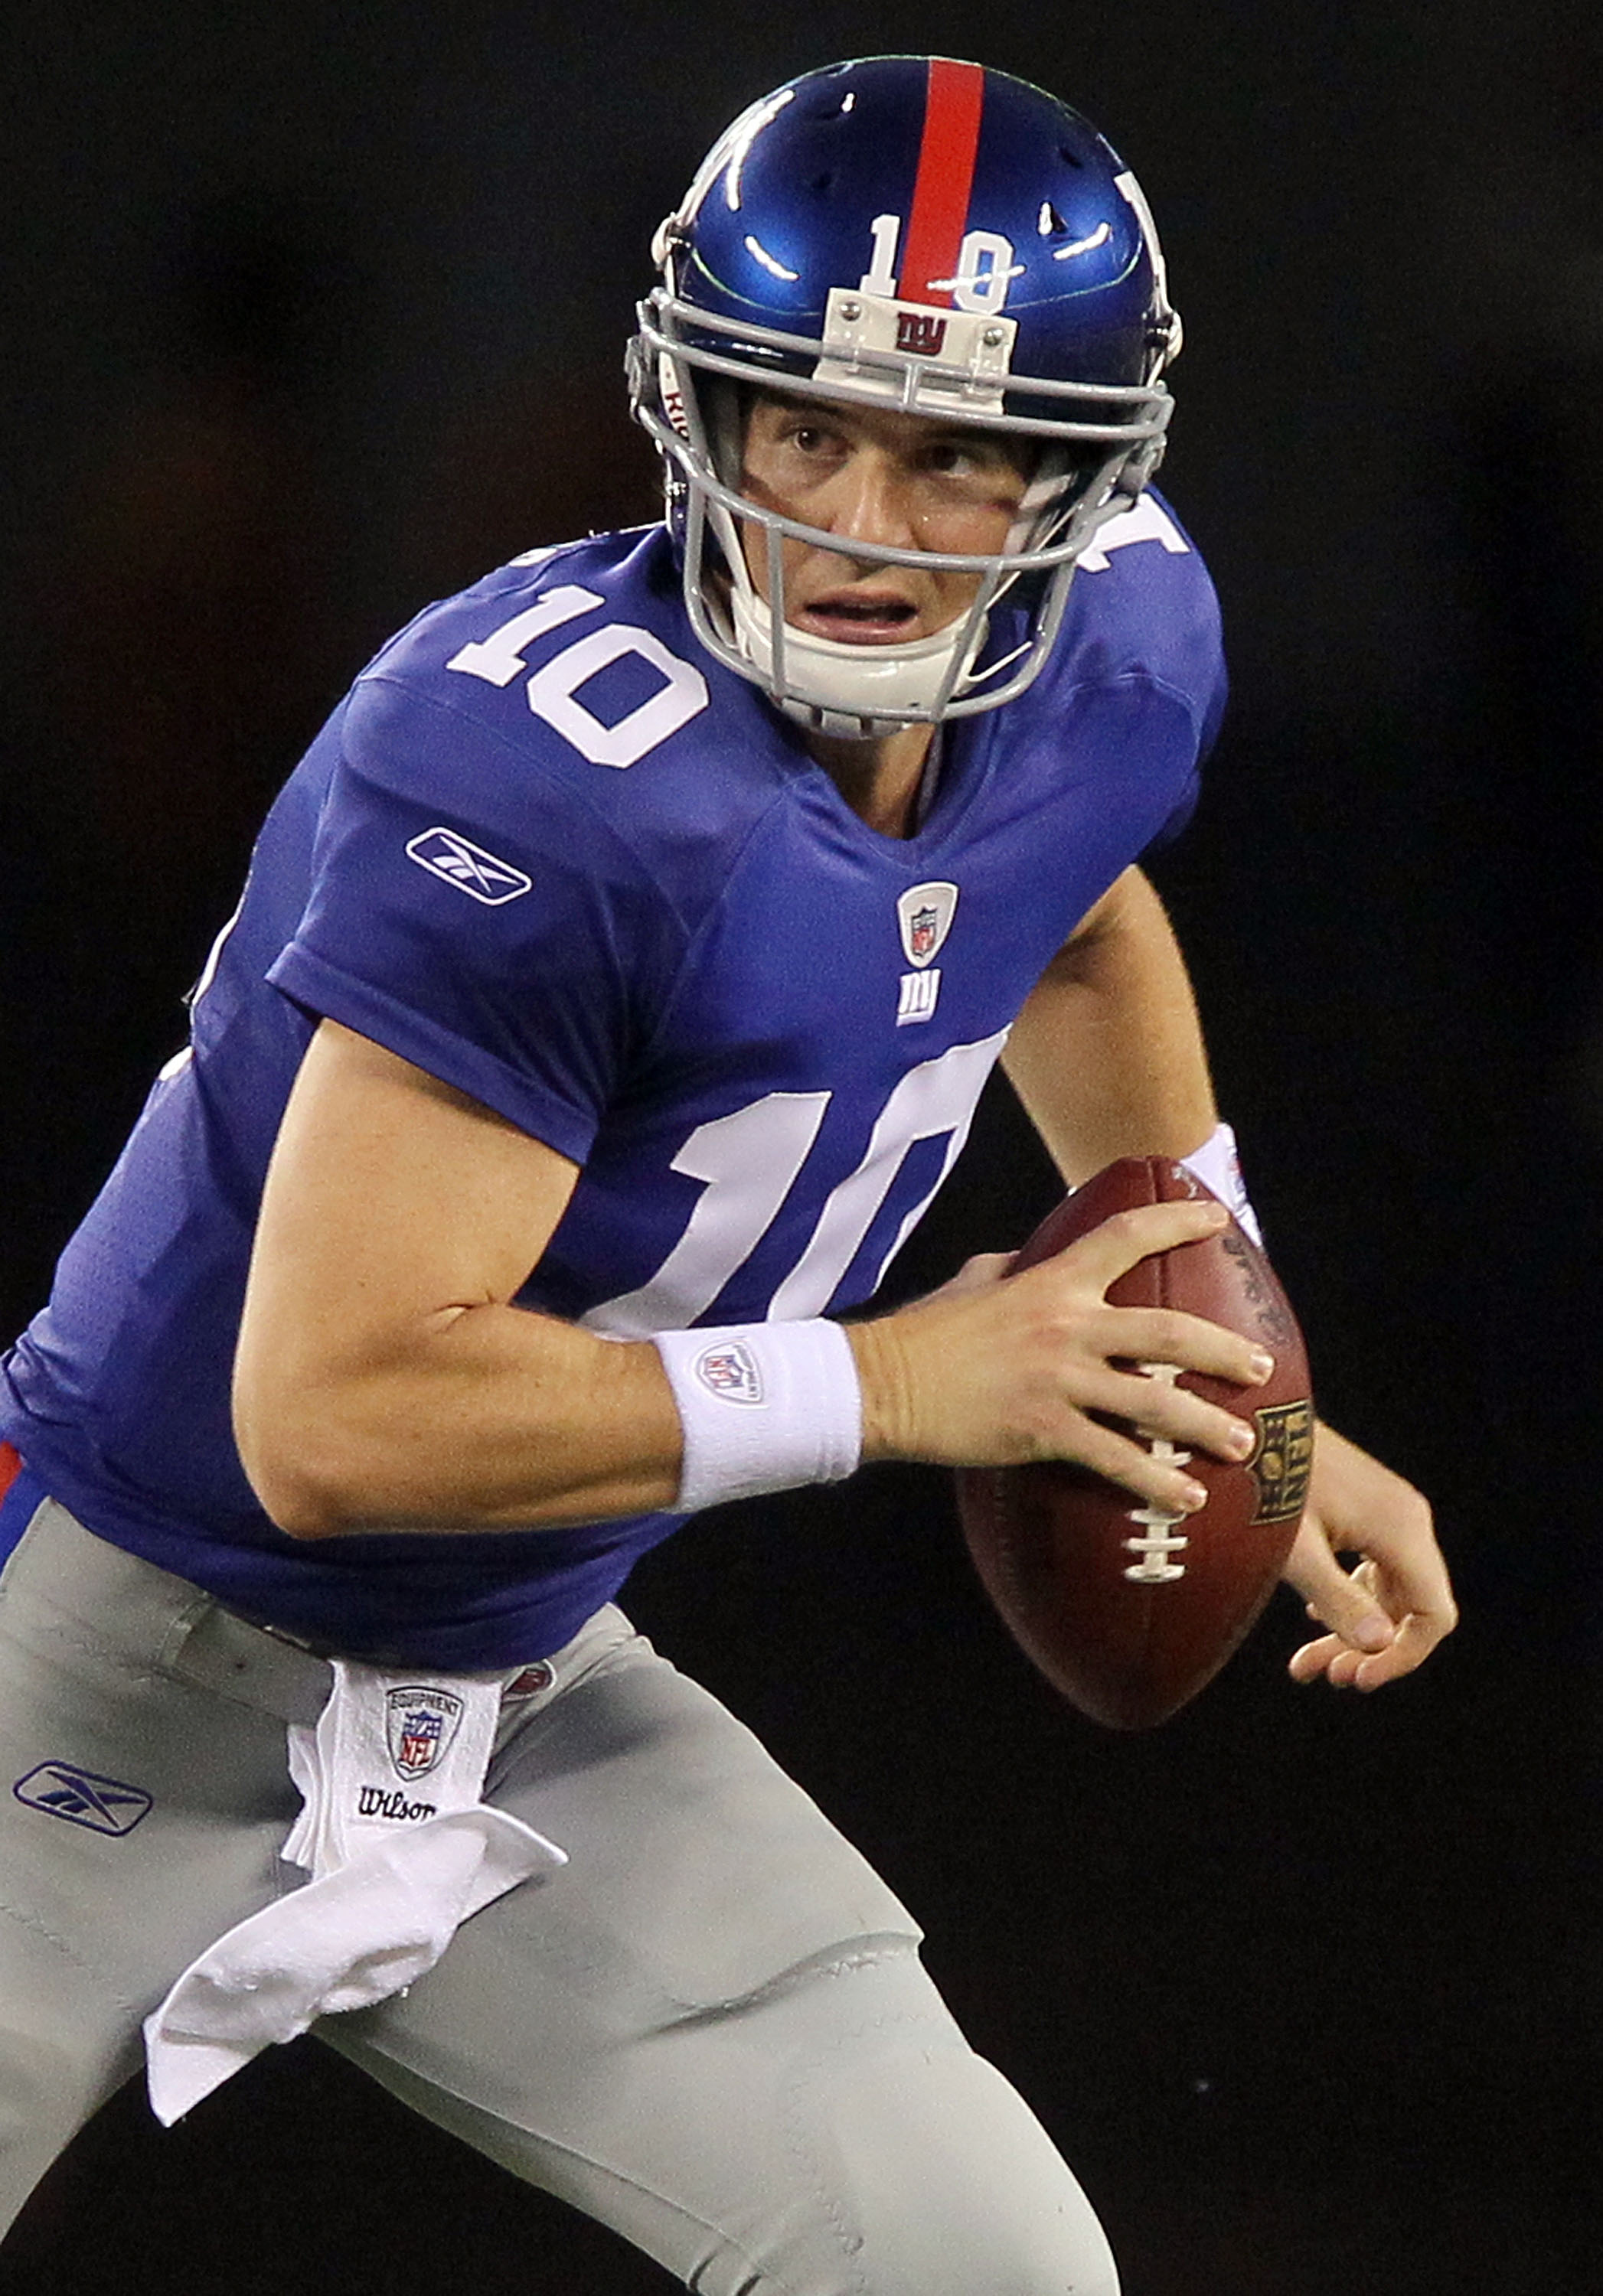 EAST RUTHERFORD, NJ - SEPTEMBER 02:  Eli Manning #10 of the New York Giants looks to pass against the New England Patriots on September 2, 2010 at the New Meadowlands Stadium in East Rutherford, New Jersey.  (Photo by Jim McIsaac/Getty Images)